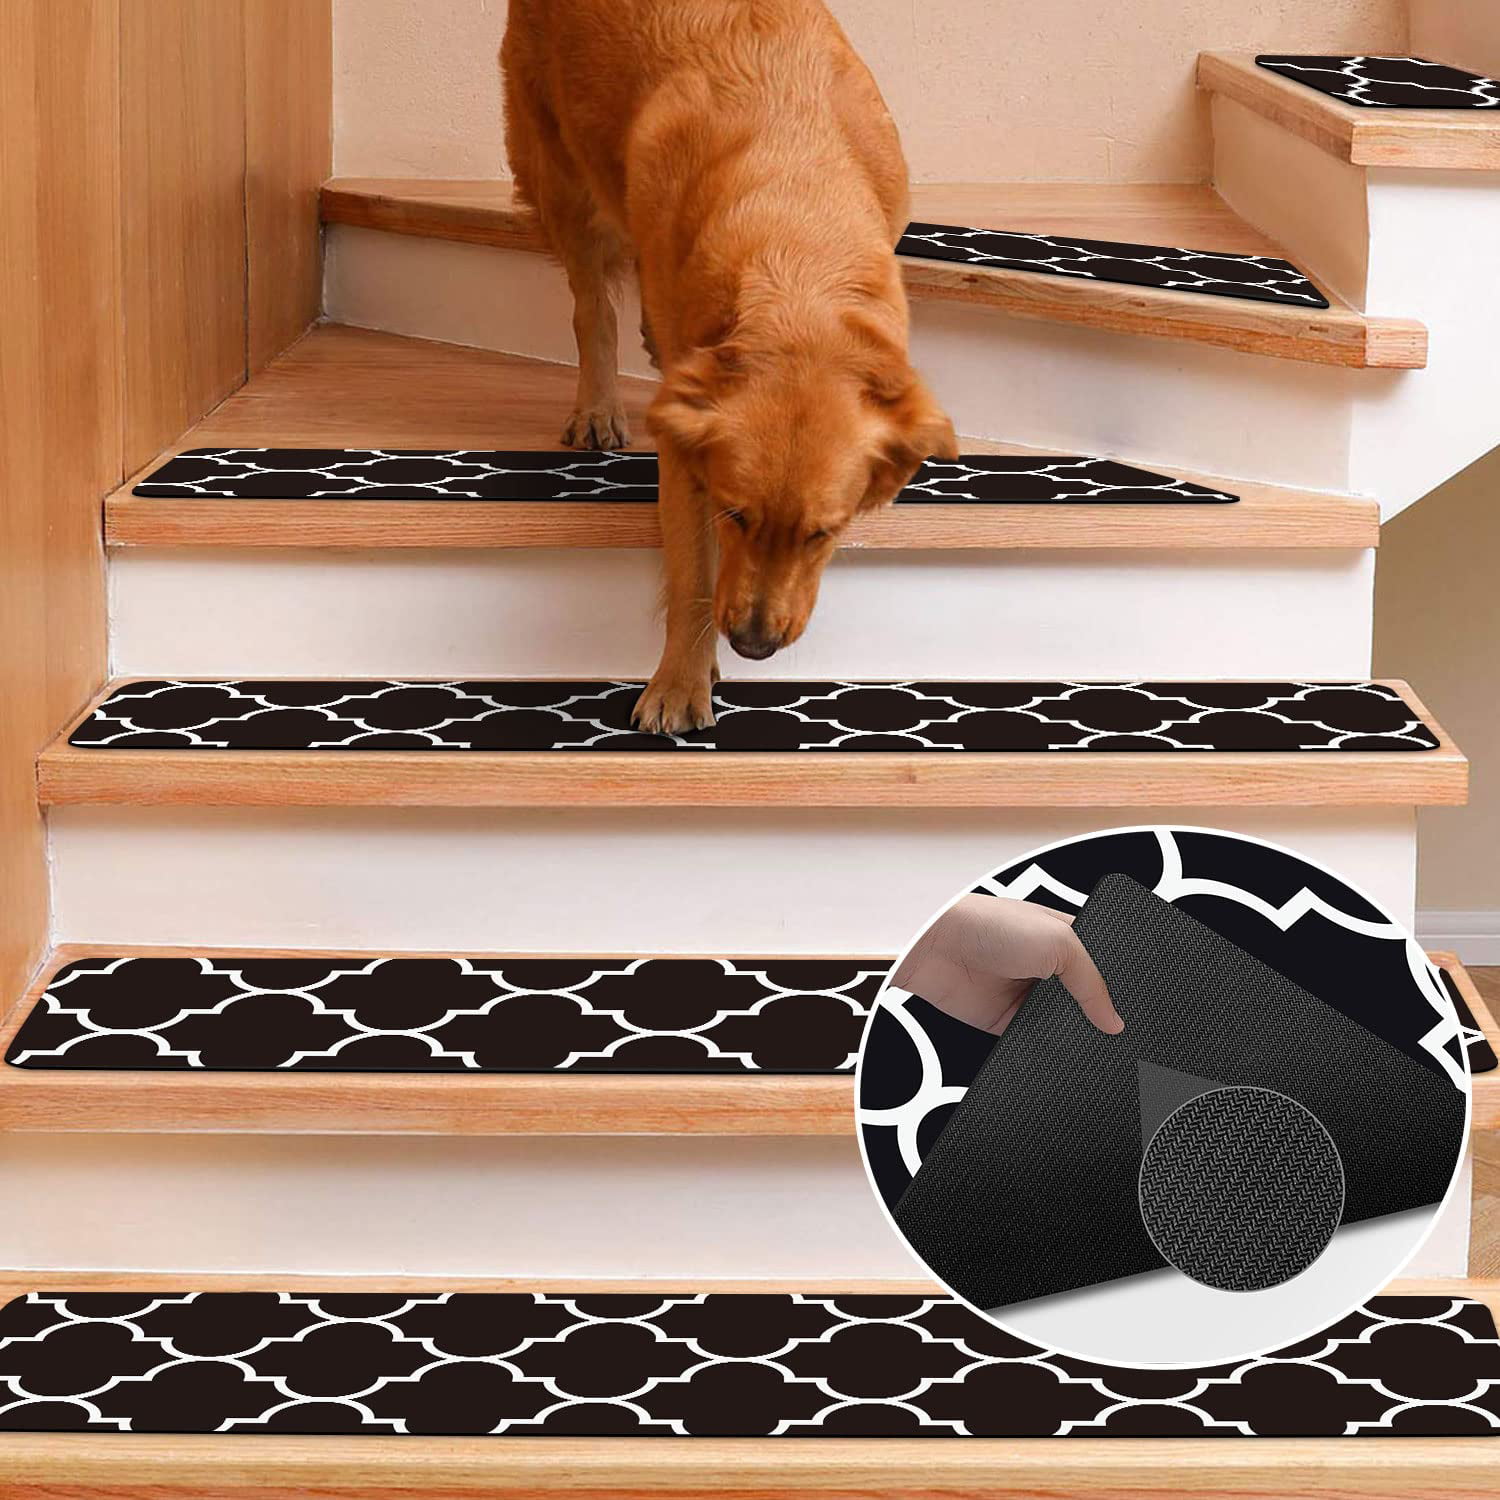 MIGHTDUTY Pack of 15 Non-Slip Safety Step Tapes Wood Stair Treads Floor Track Sticker with Small Roller for Kids Elders Dogs Indoor Home or Outdoor Setting 15x60cm, Black 